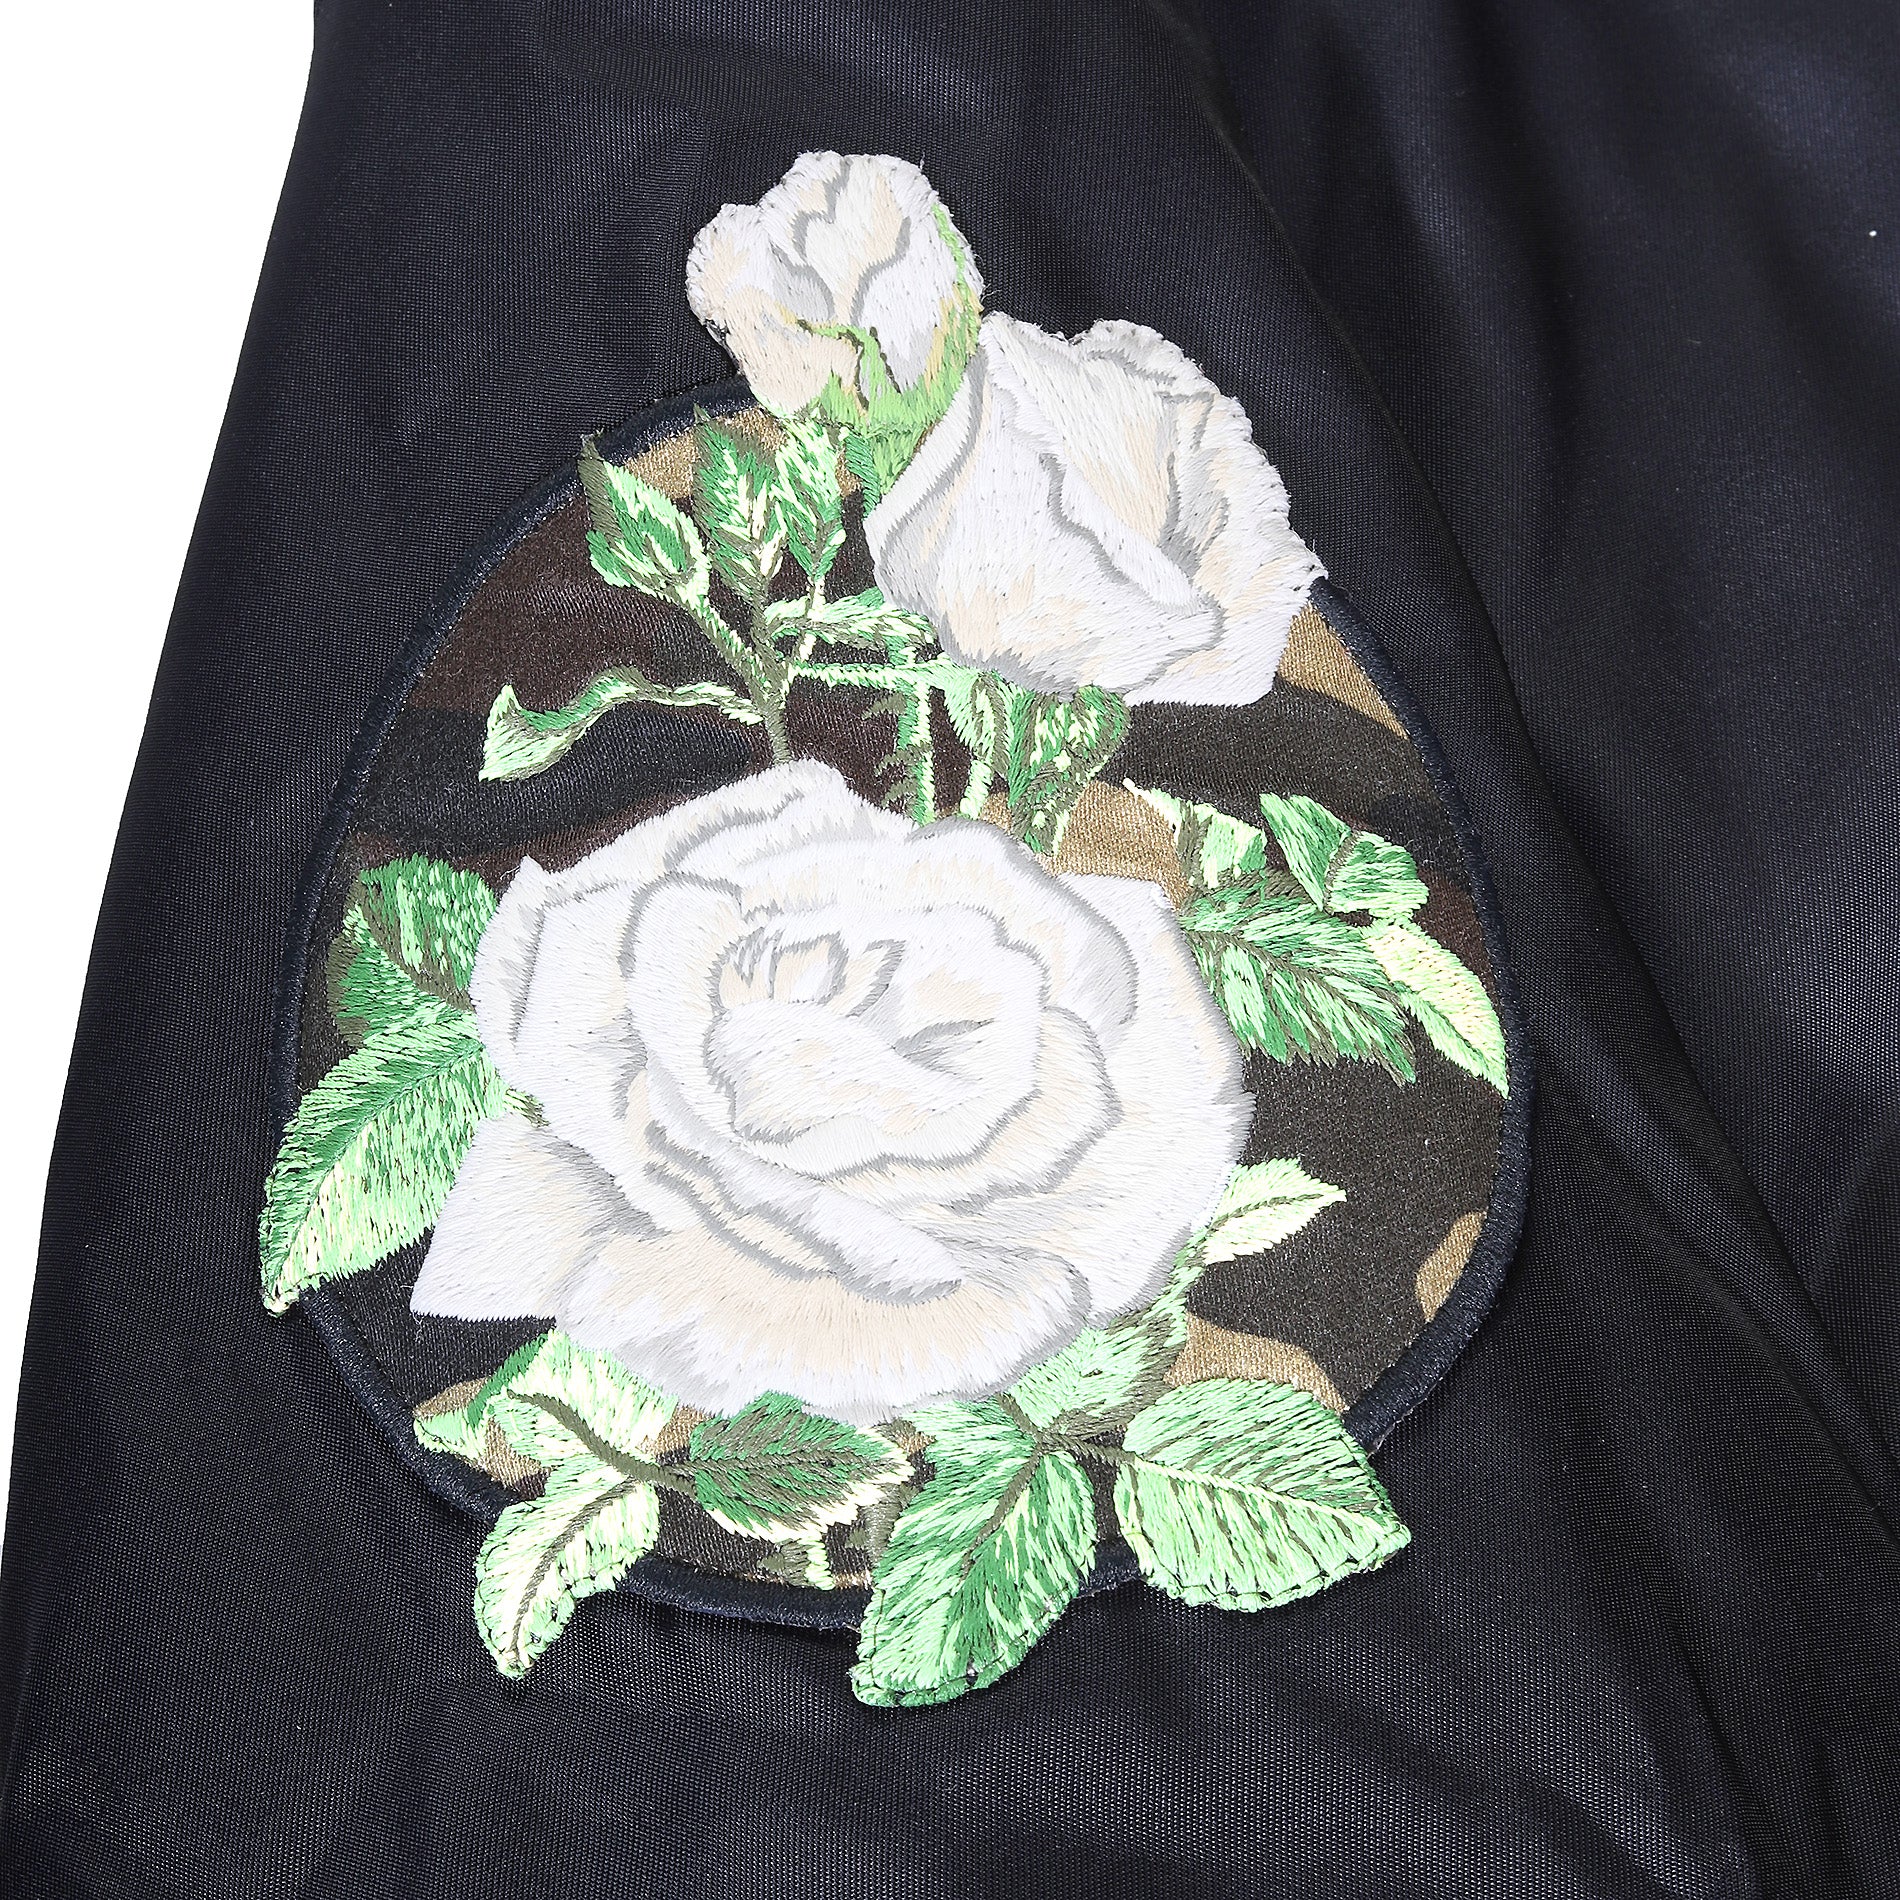 Dior Homme SS16 Rose Patch Bomber Jacket